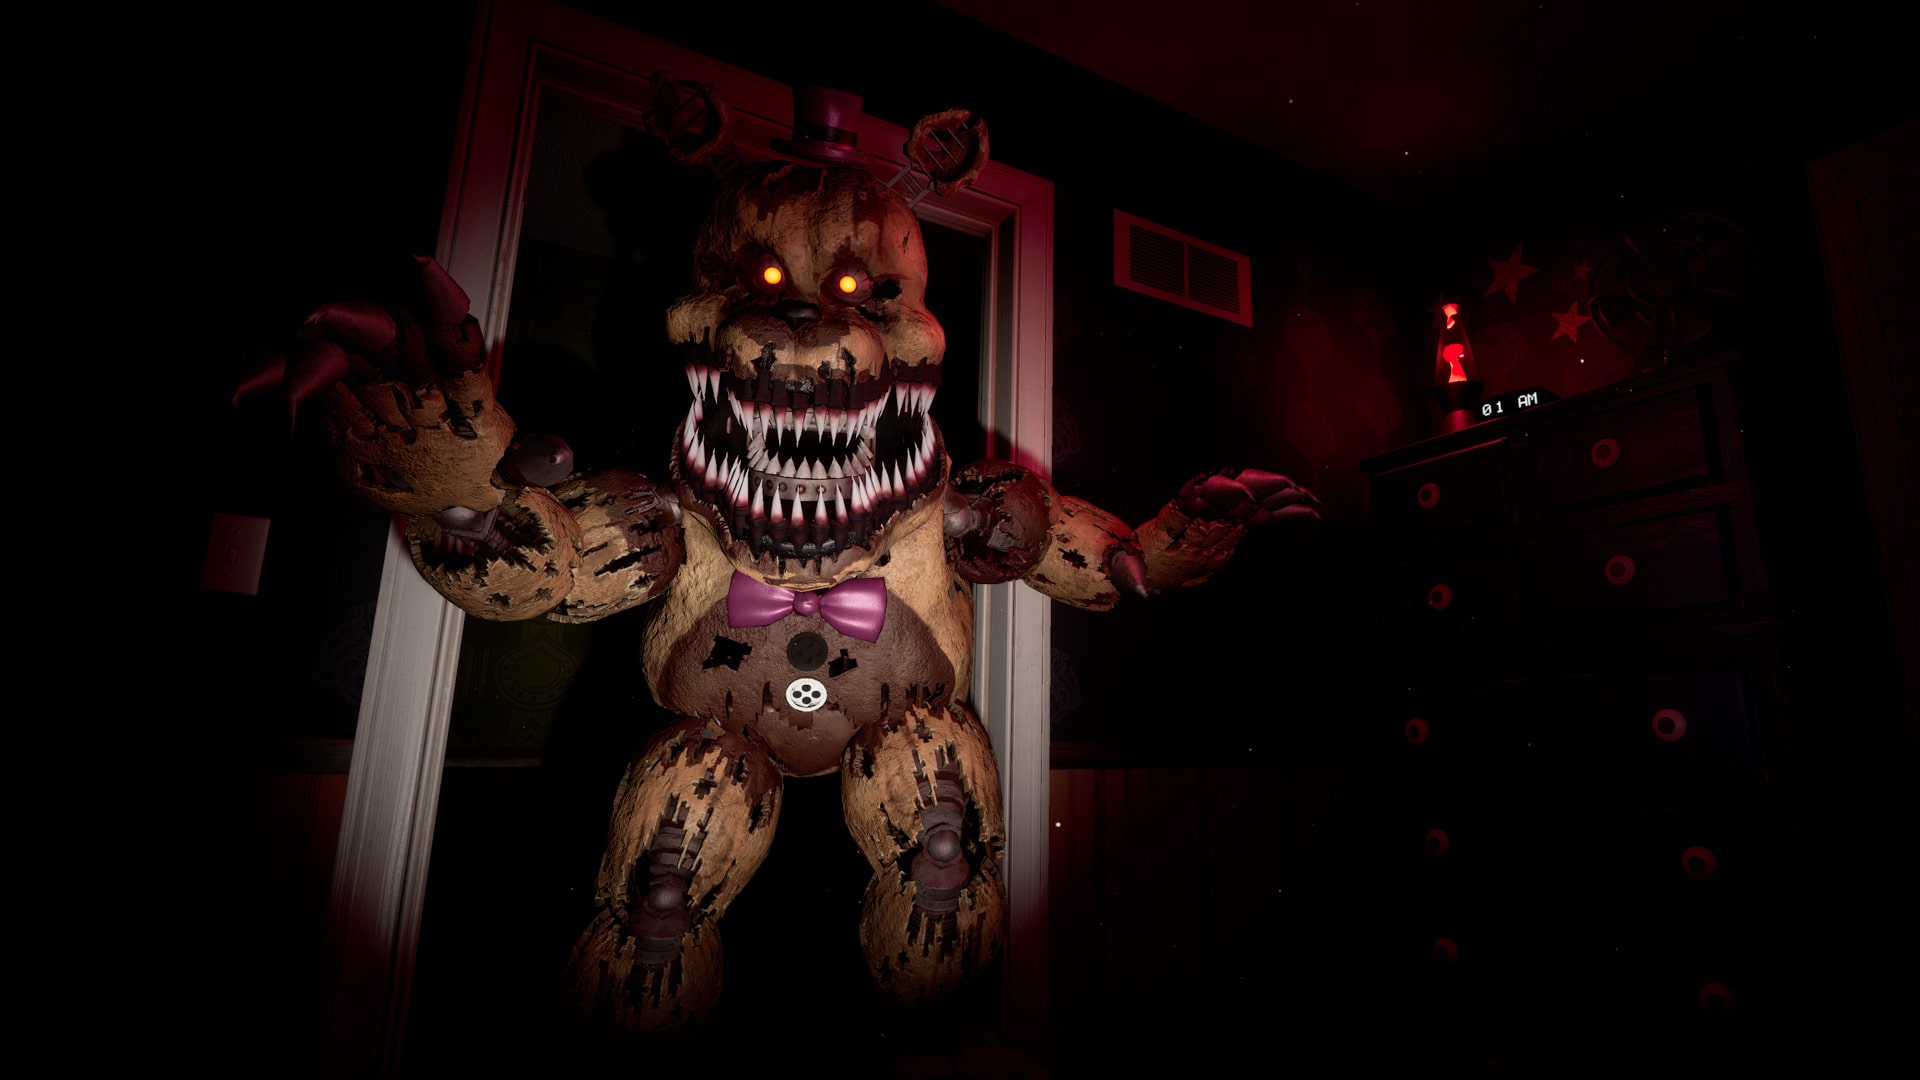 Comprar Five Nights at Freddy's: Help Wanted 2 PS5 Playstation Store